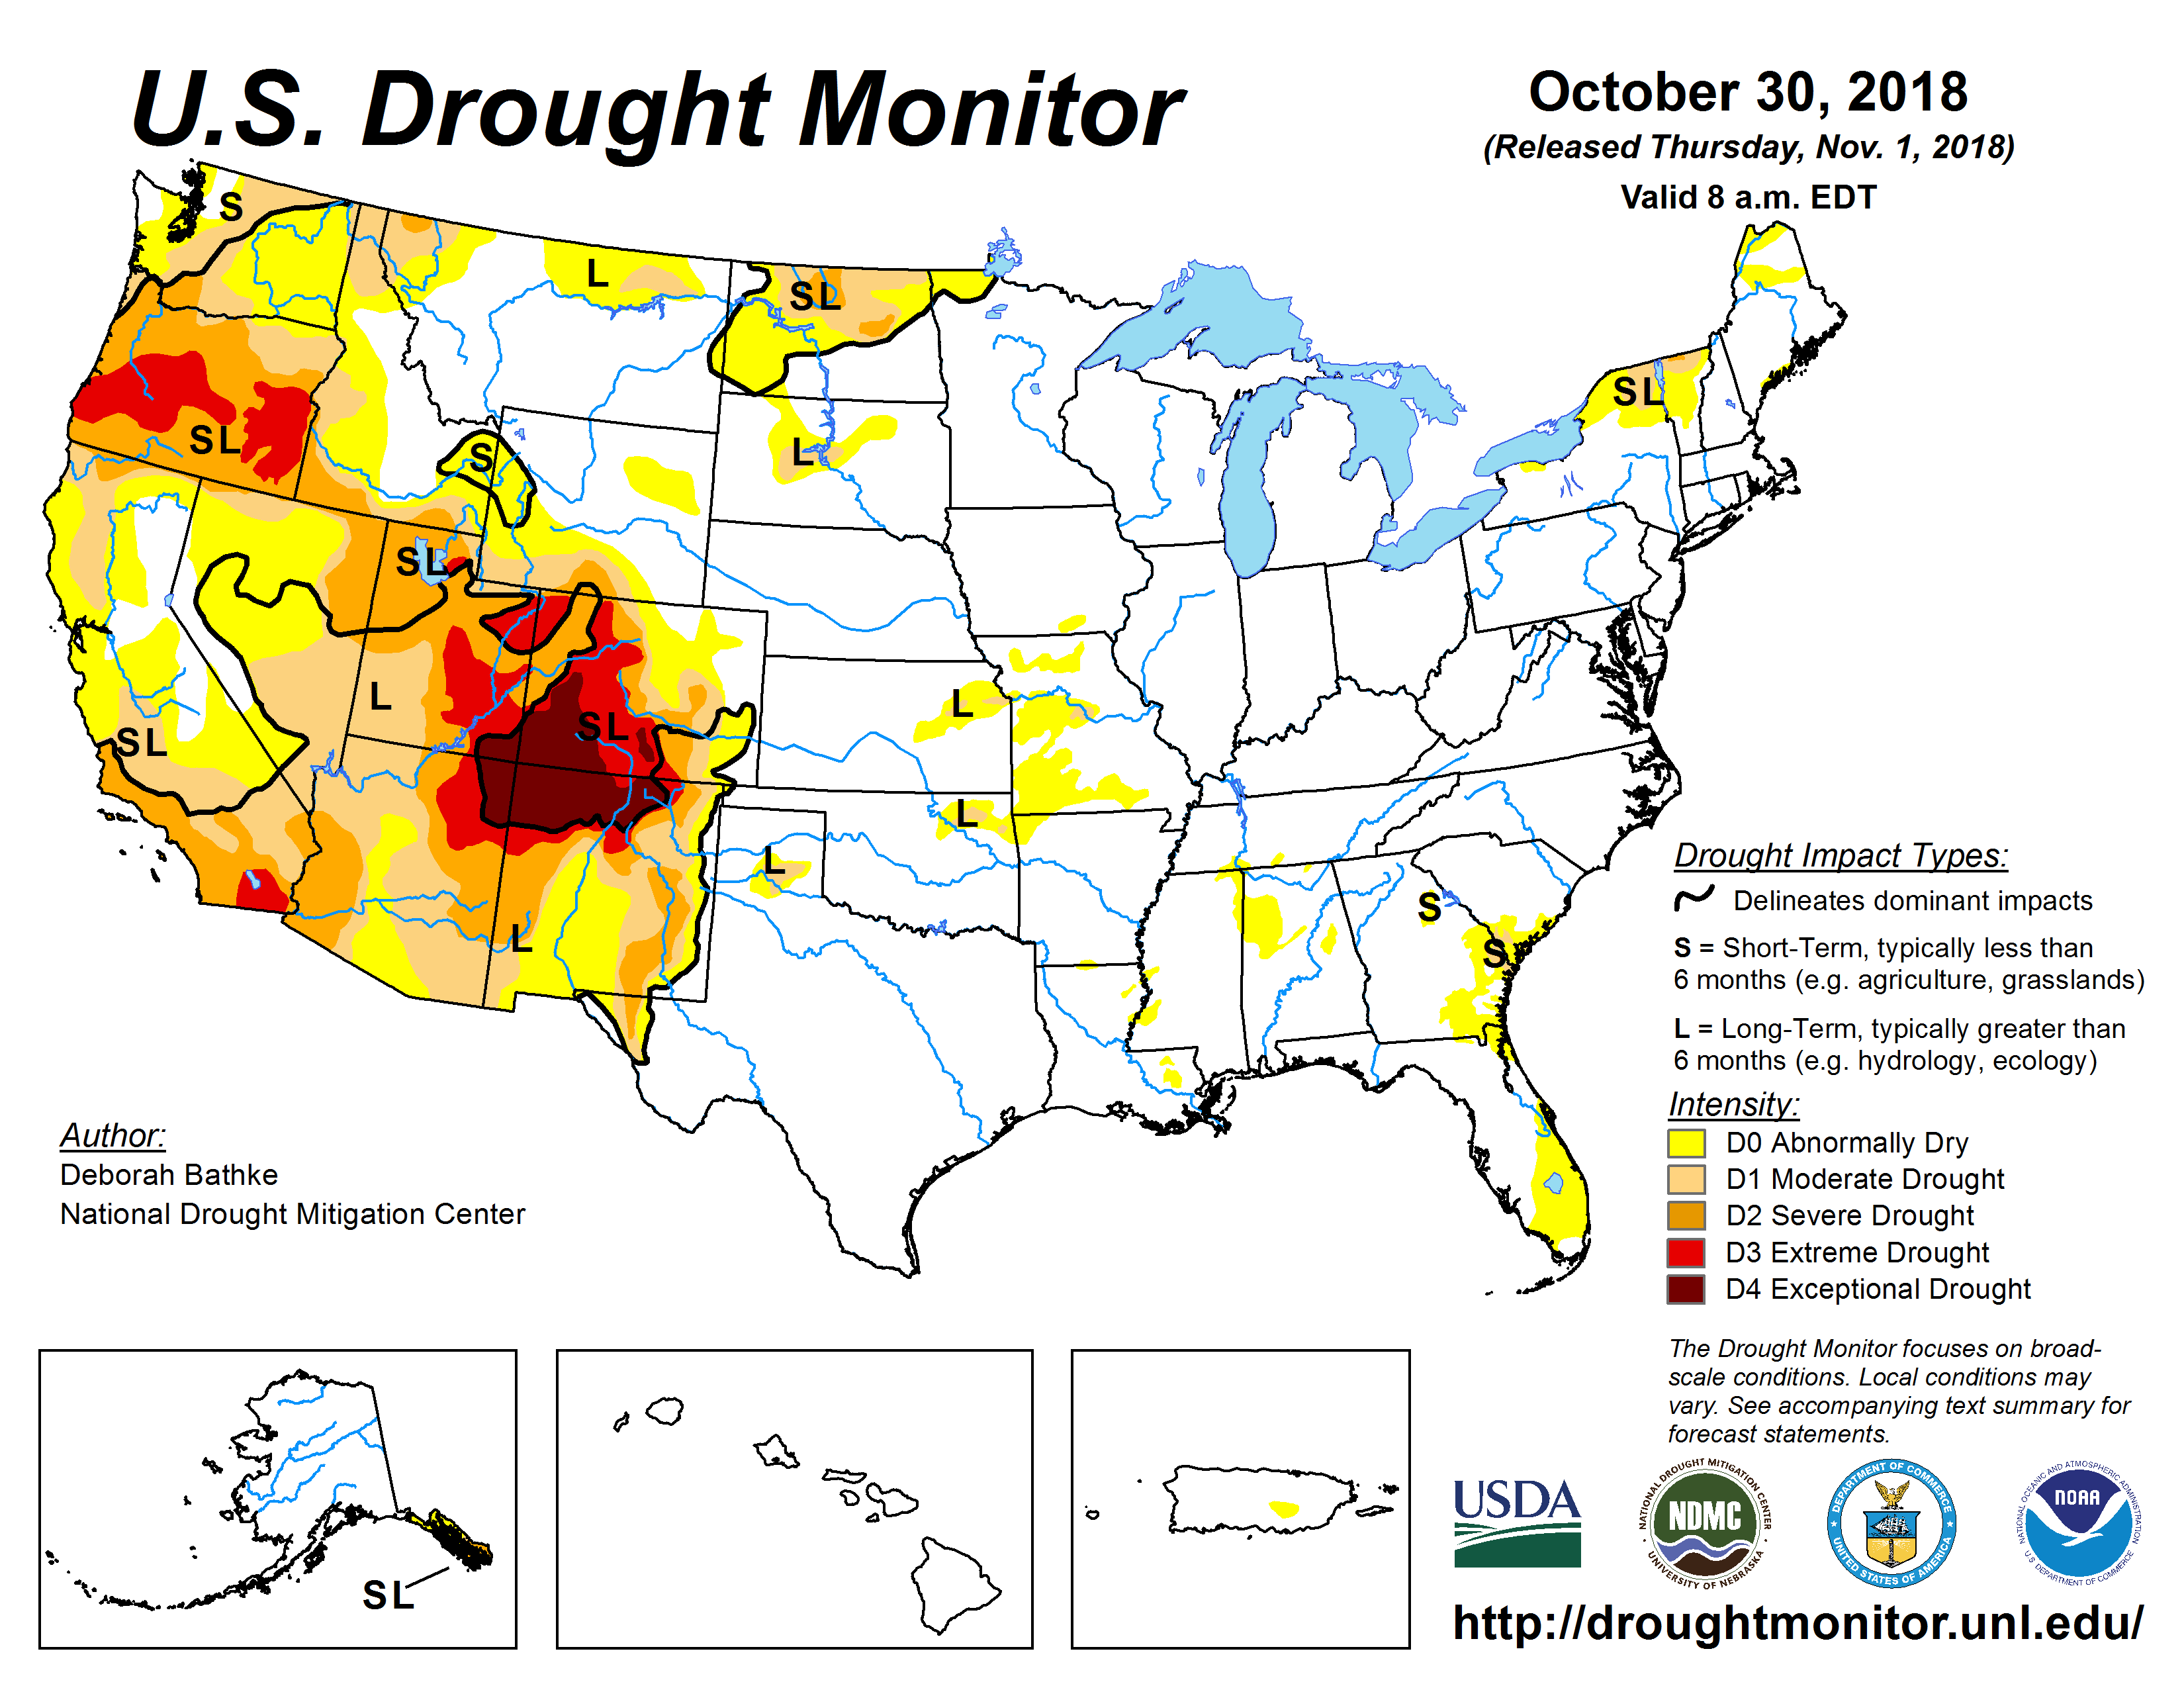 The U.S. Drought Monitor drought map valid October 30, 2018